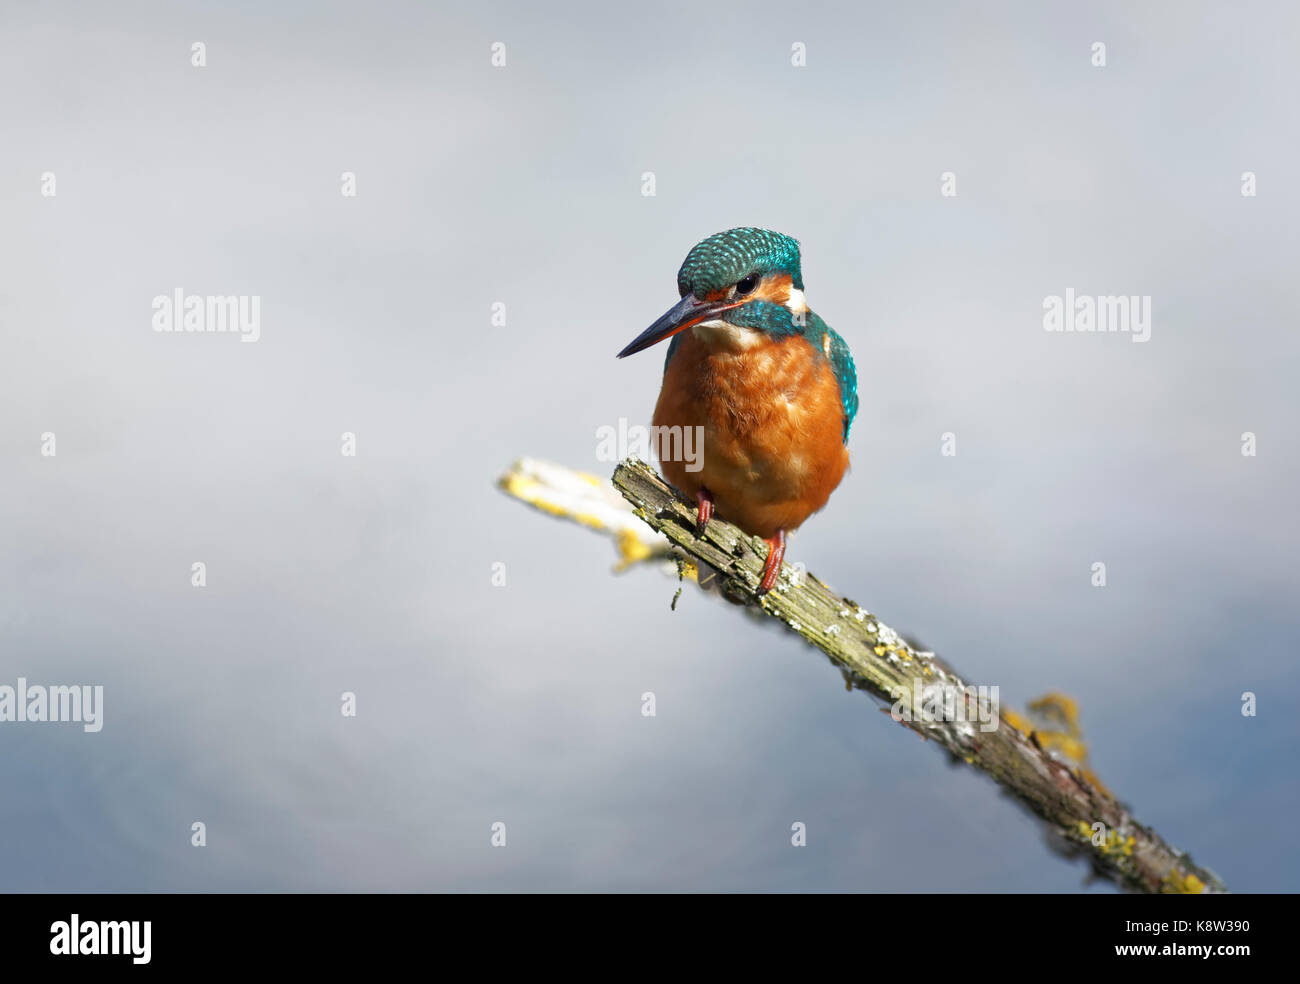 Kingfisher resting on perch Stock Photo